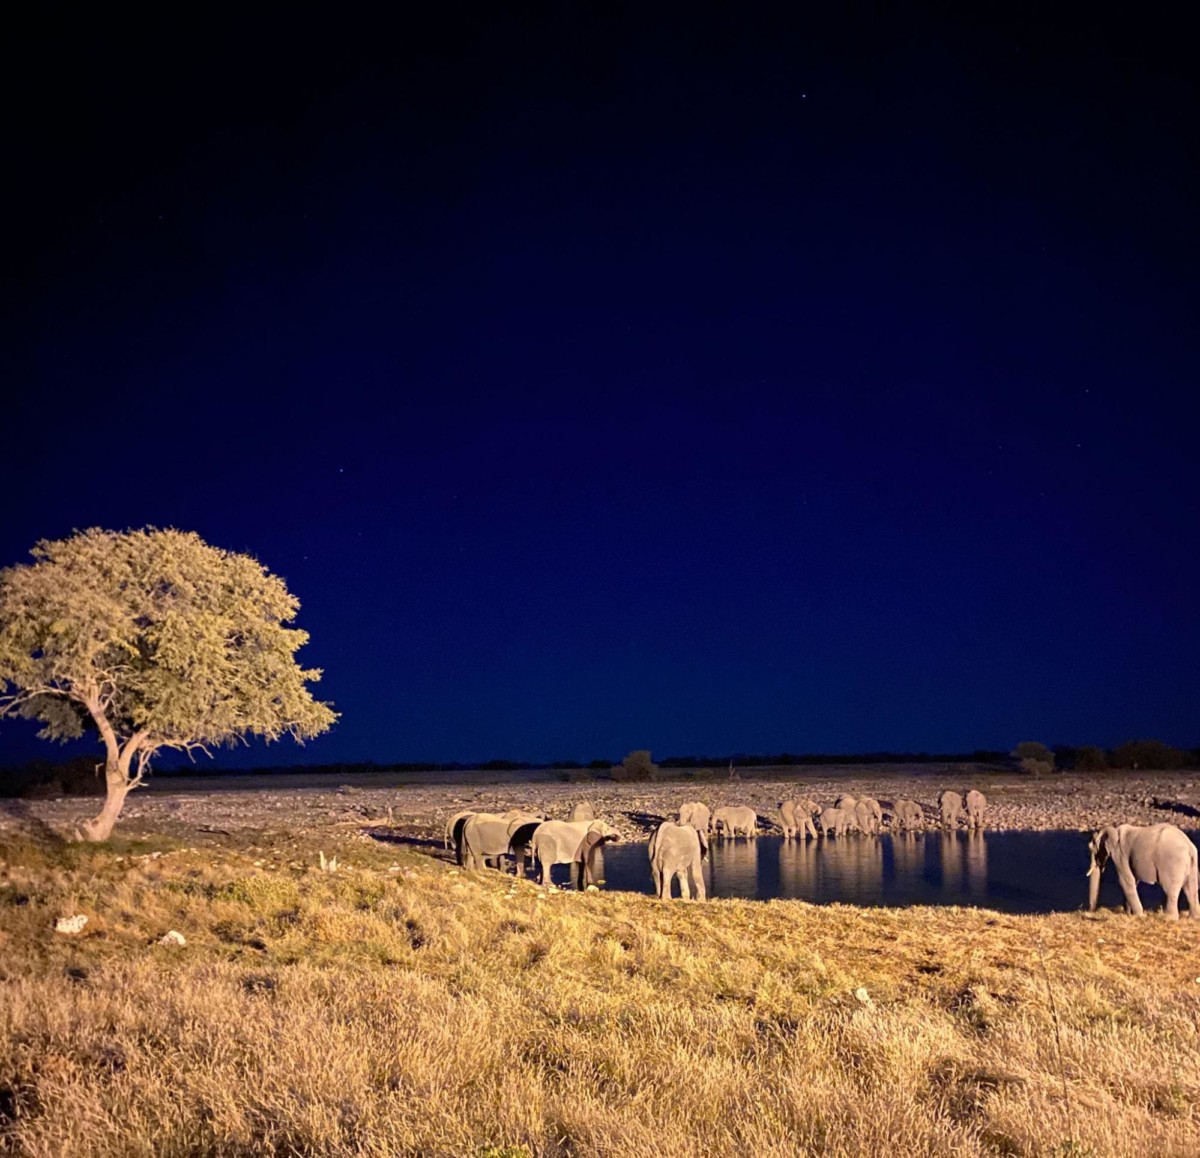 Over a dozen elephants gather drinking water at a pond at night in Namibia 